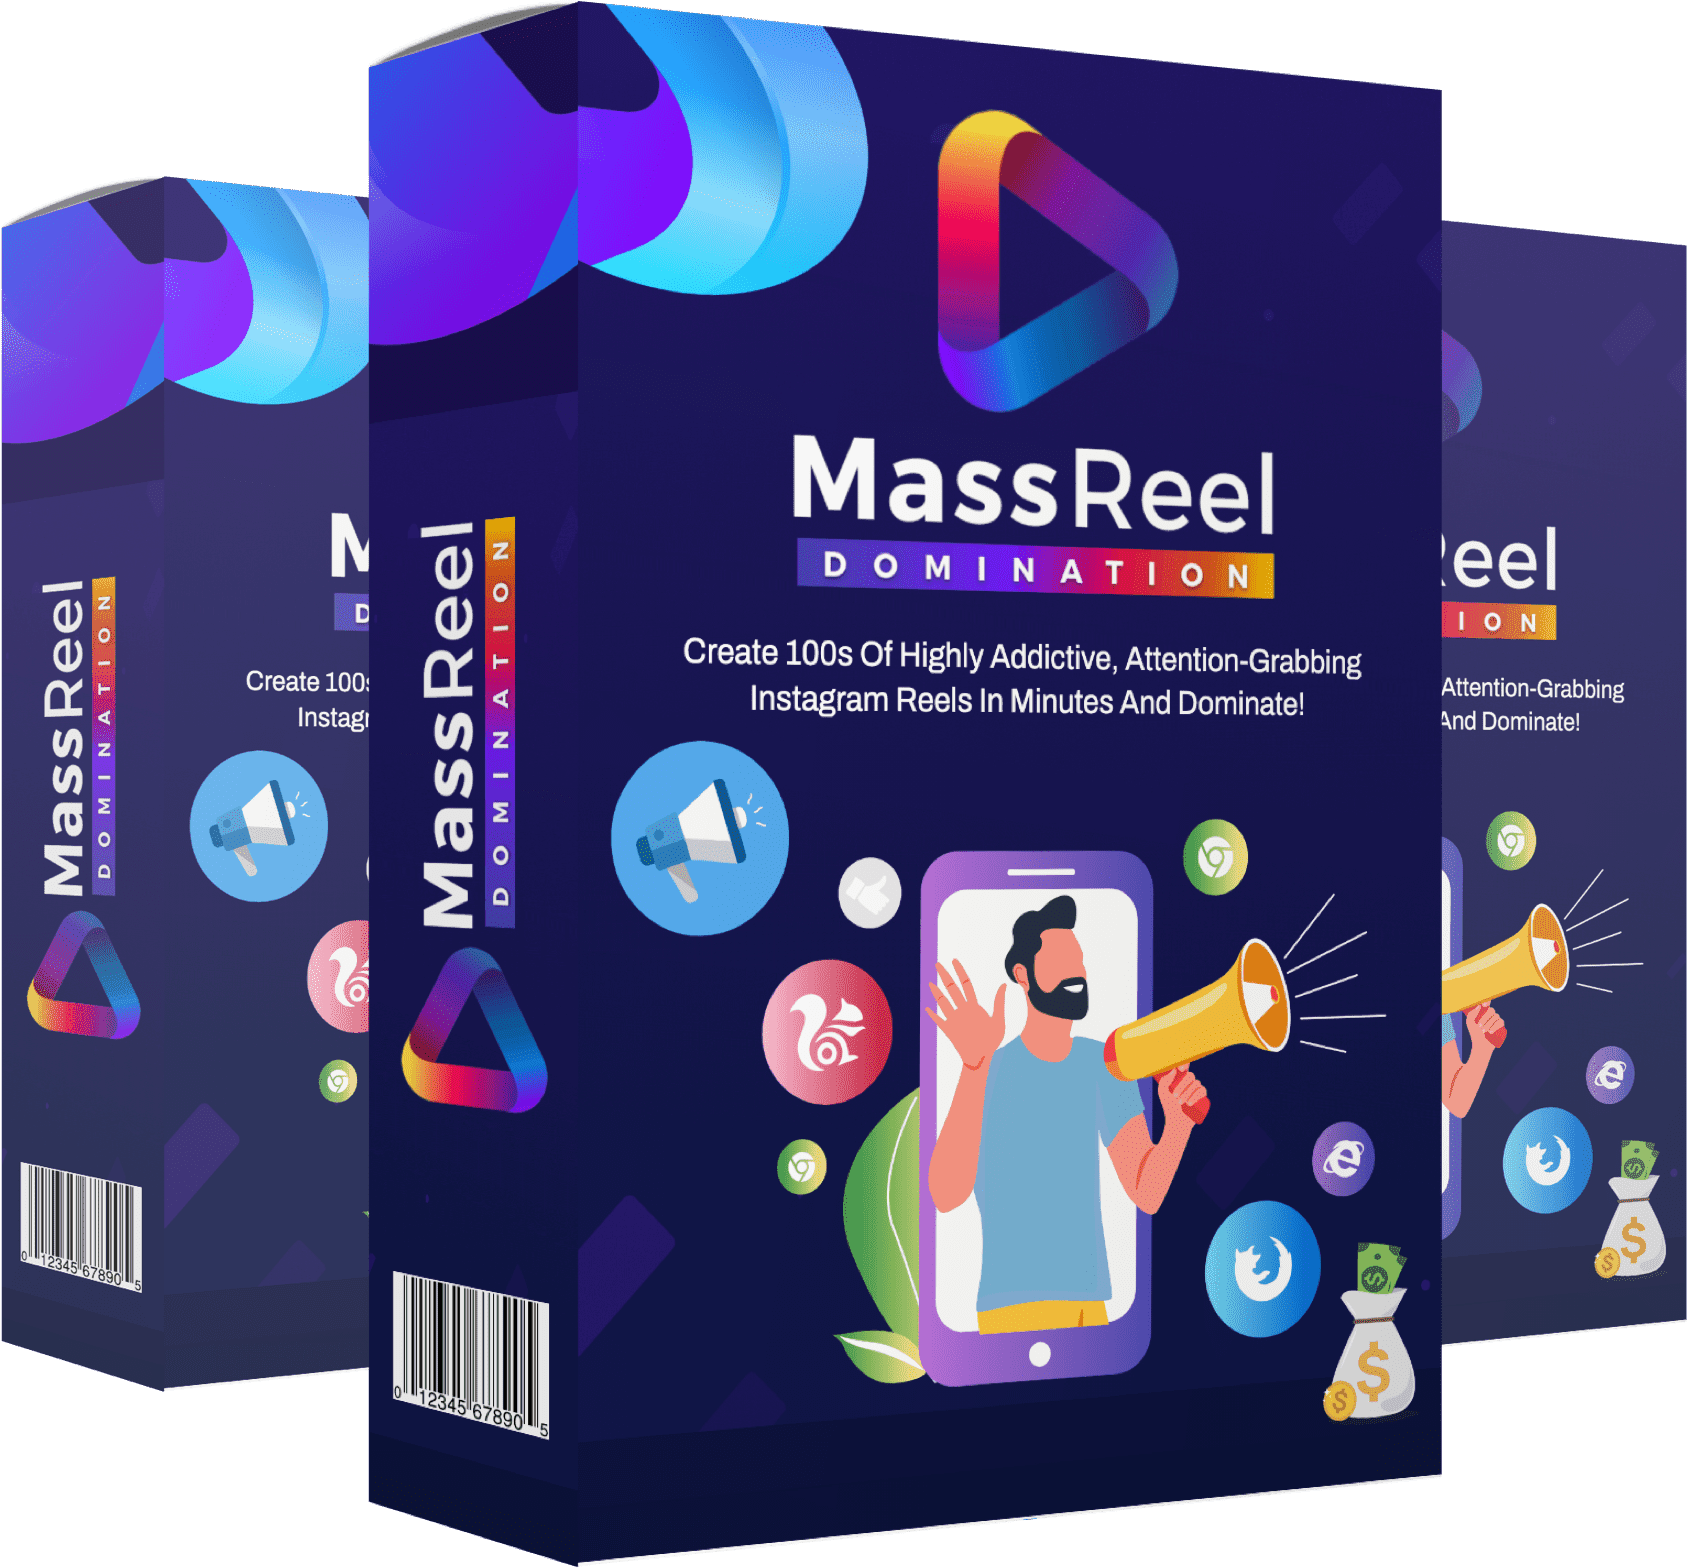 MassReelDomination Review - Should I Use this Software